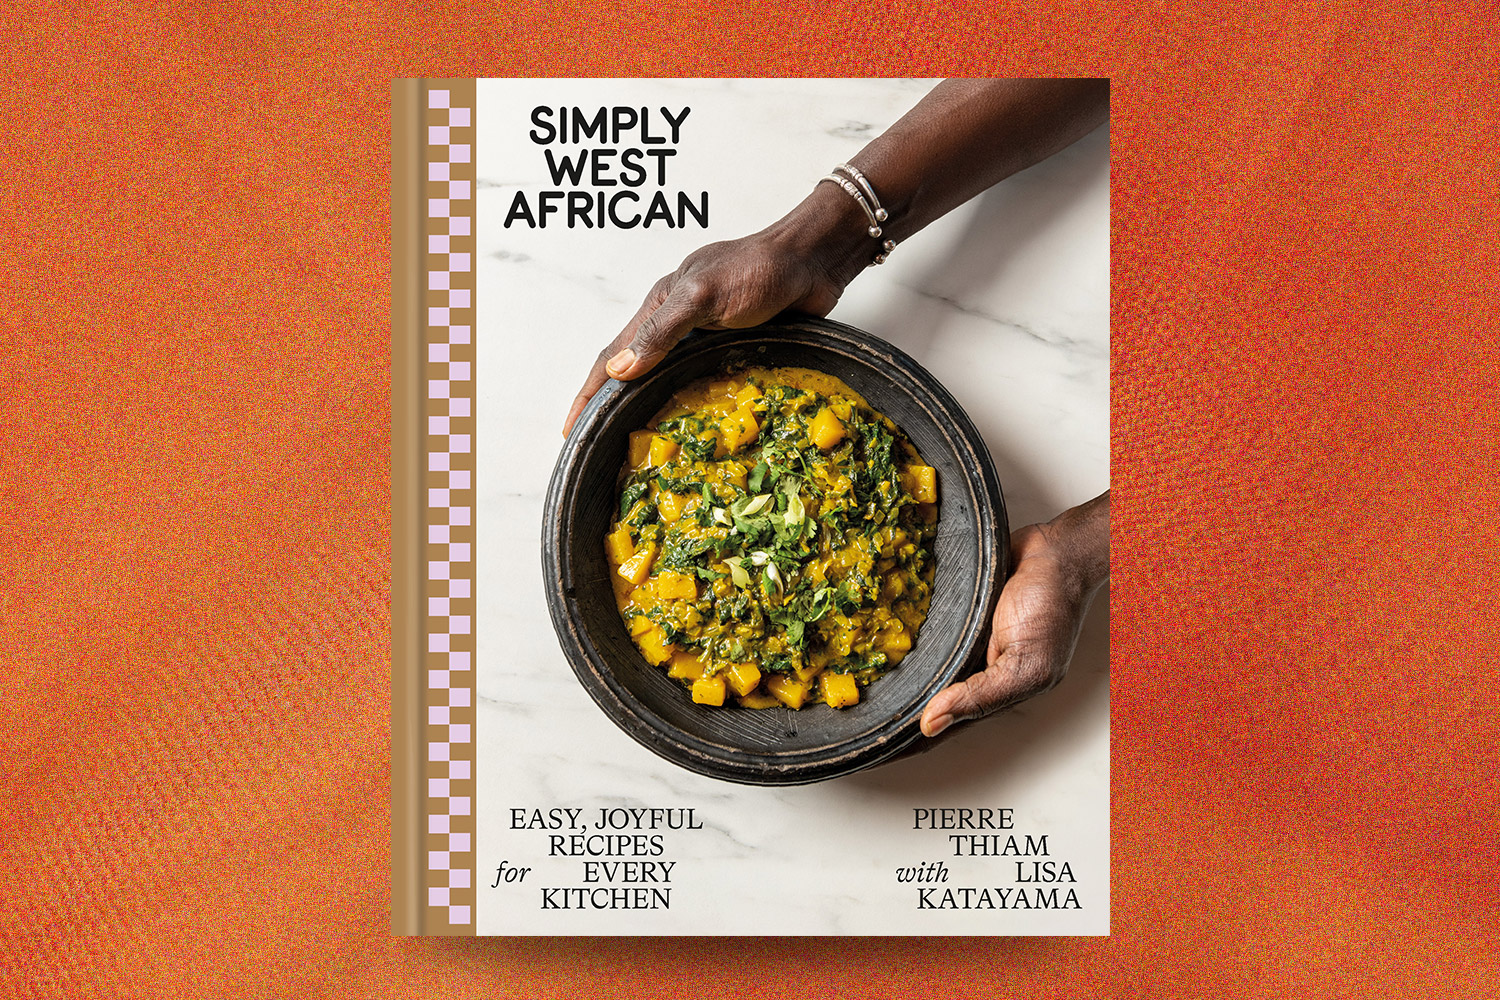 simply west african cookbook on an orange background